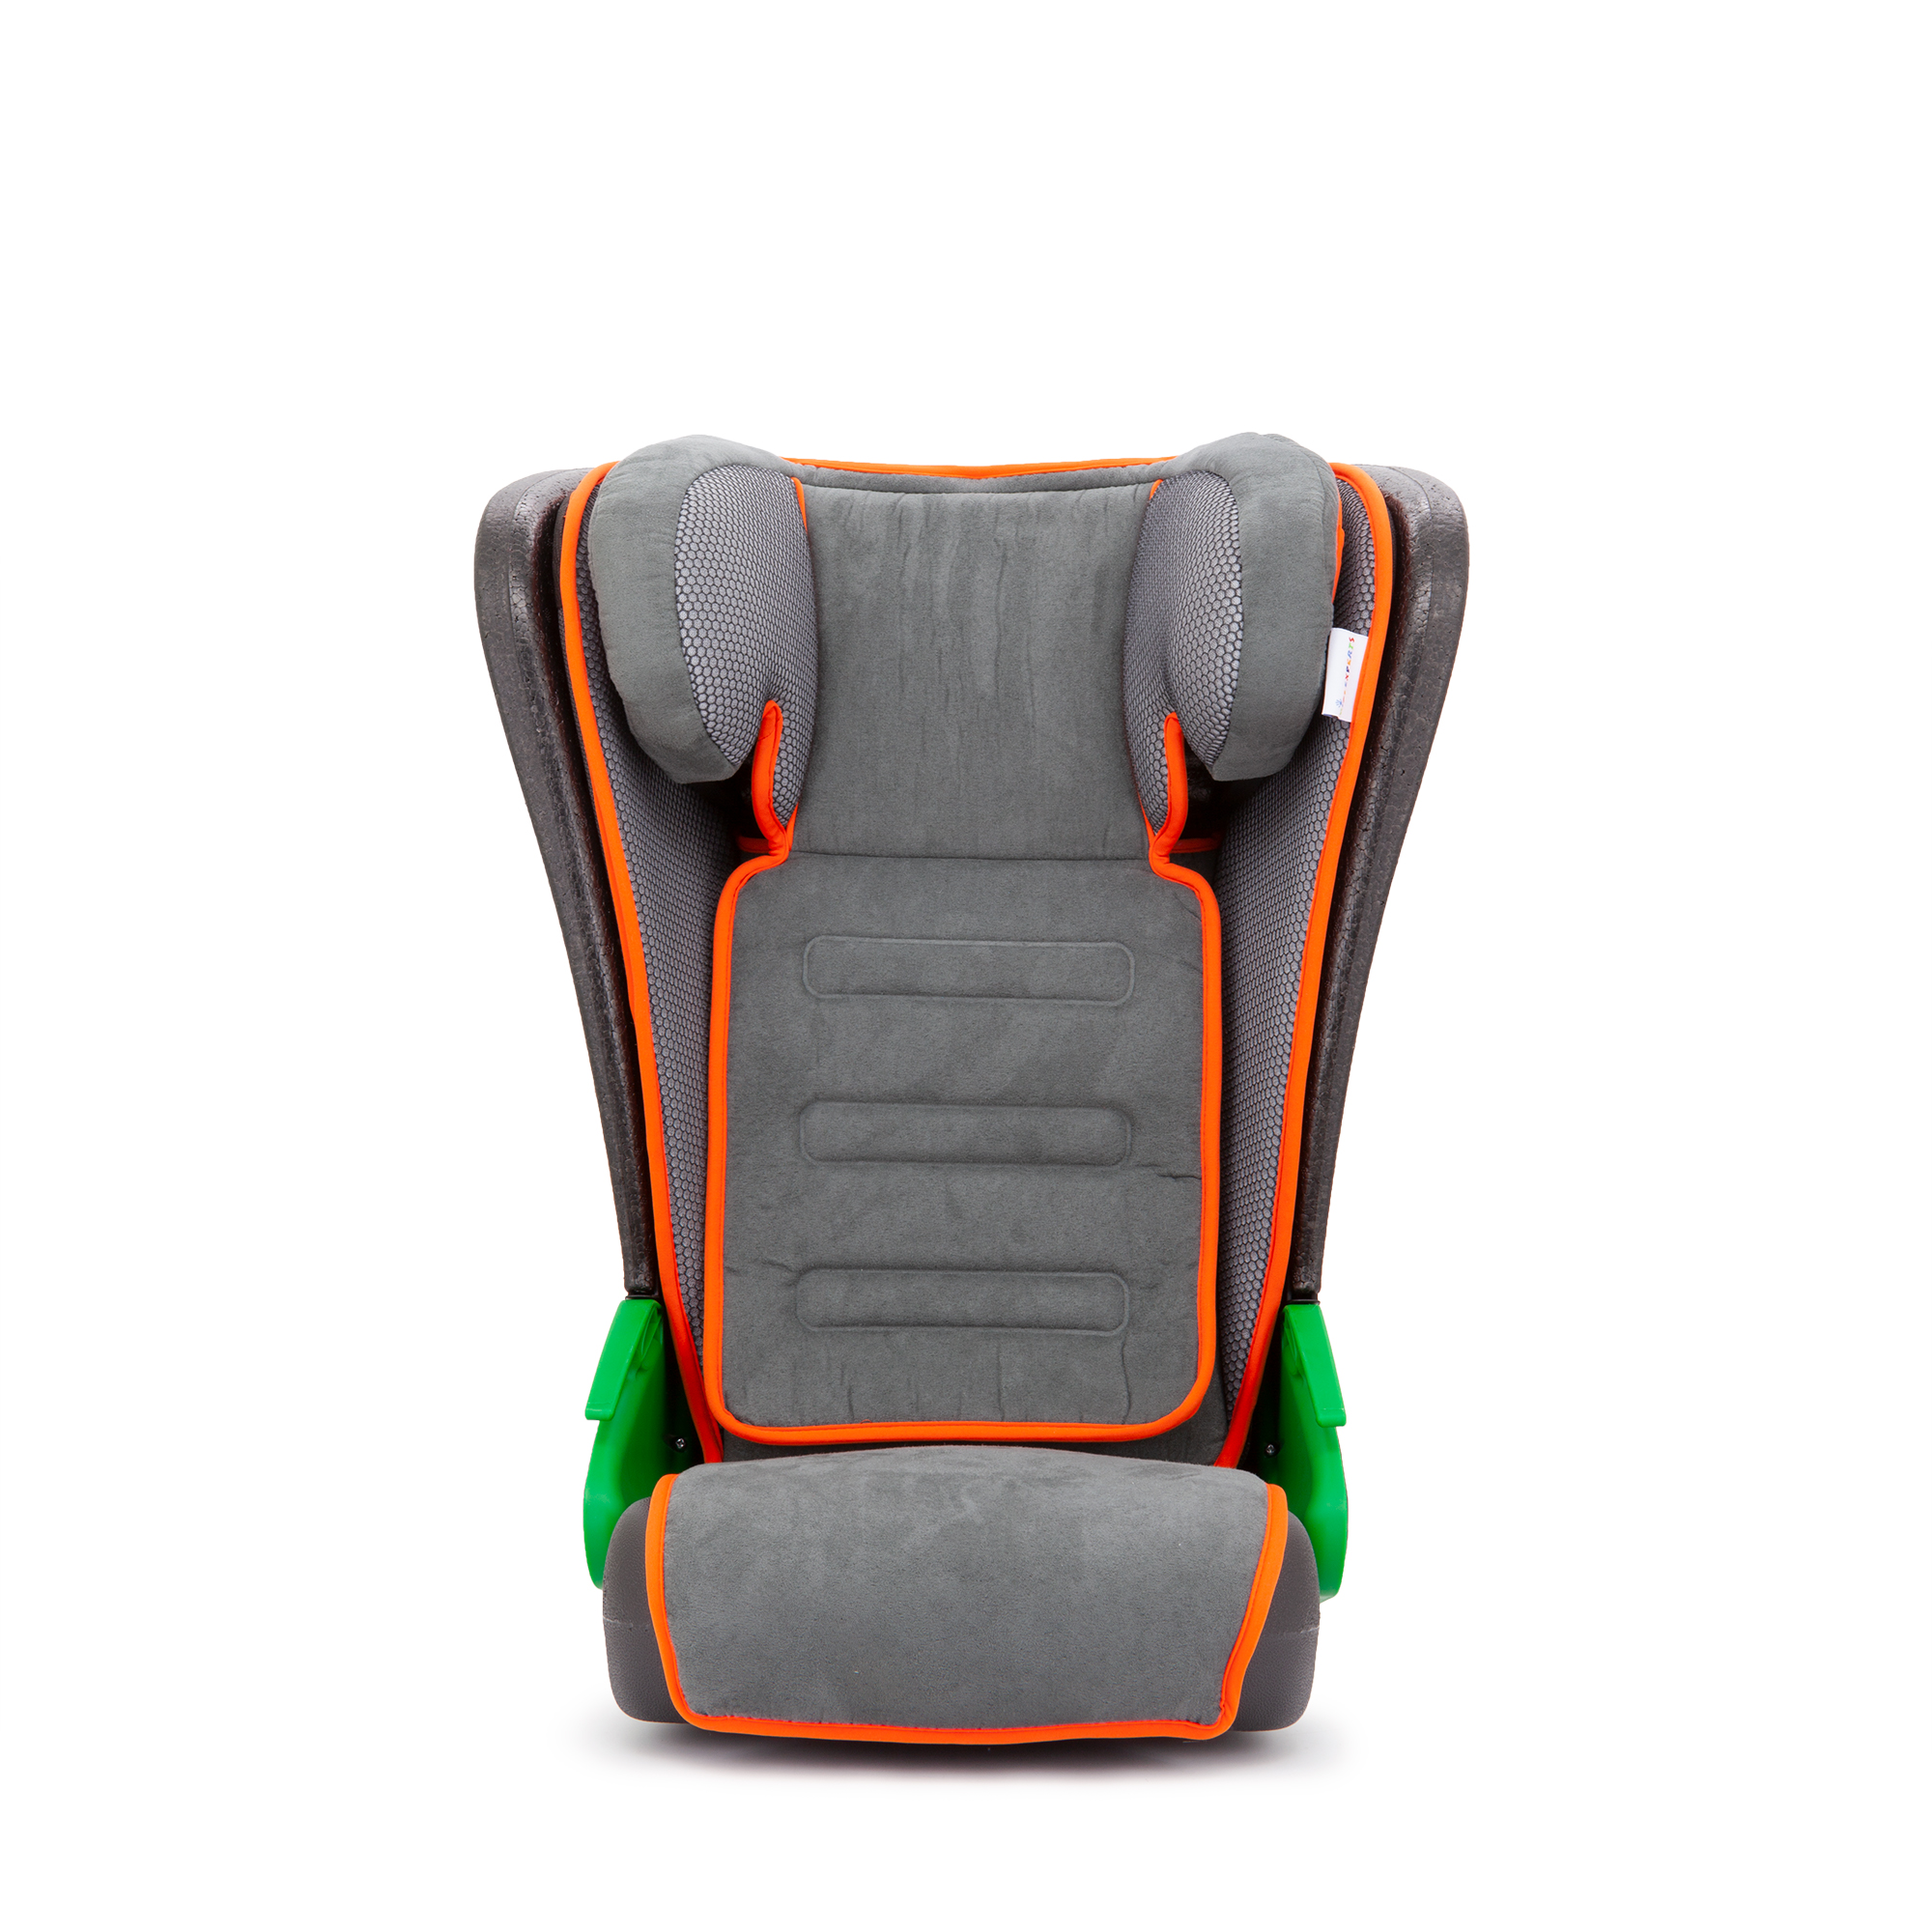 Large Upright Child Car Seat for 2 Year Old